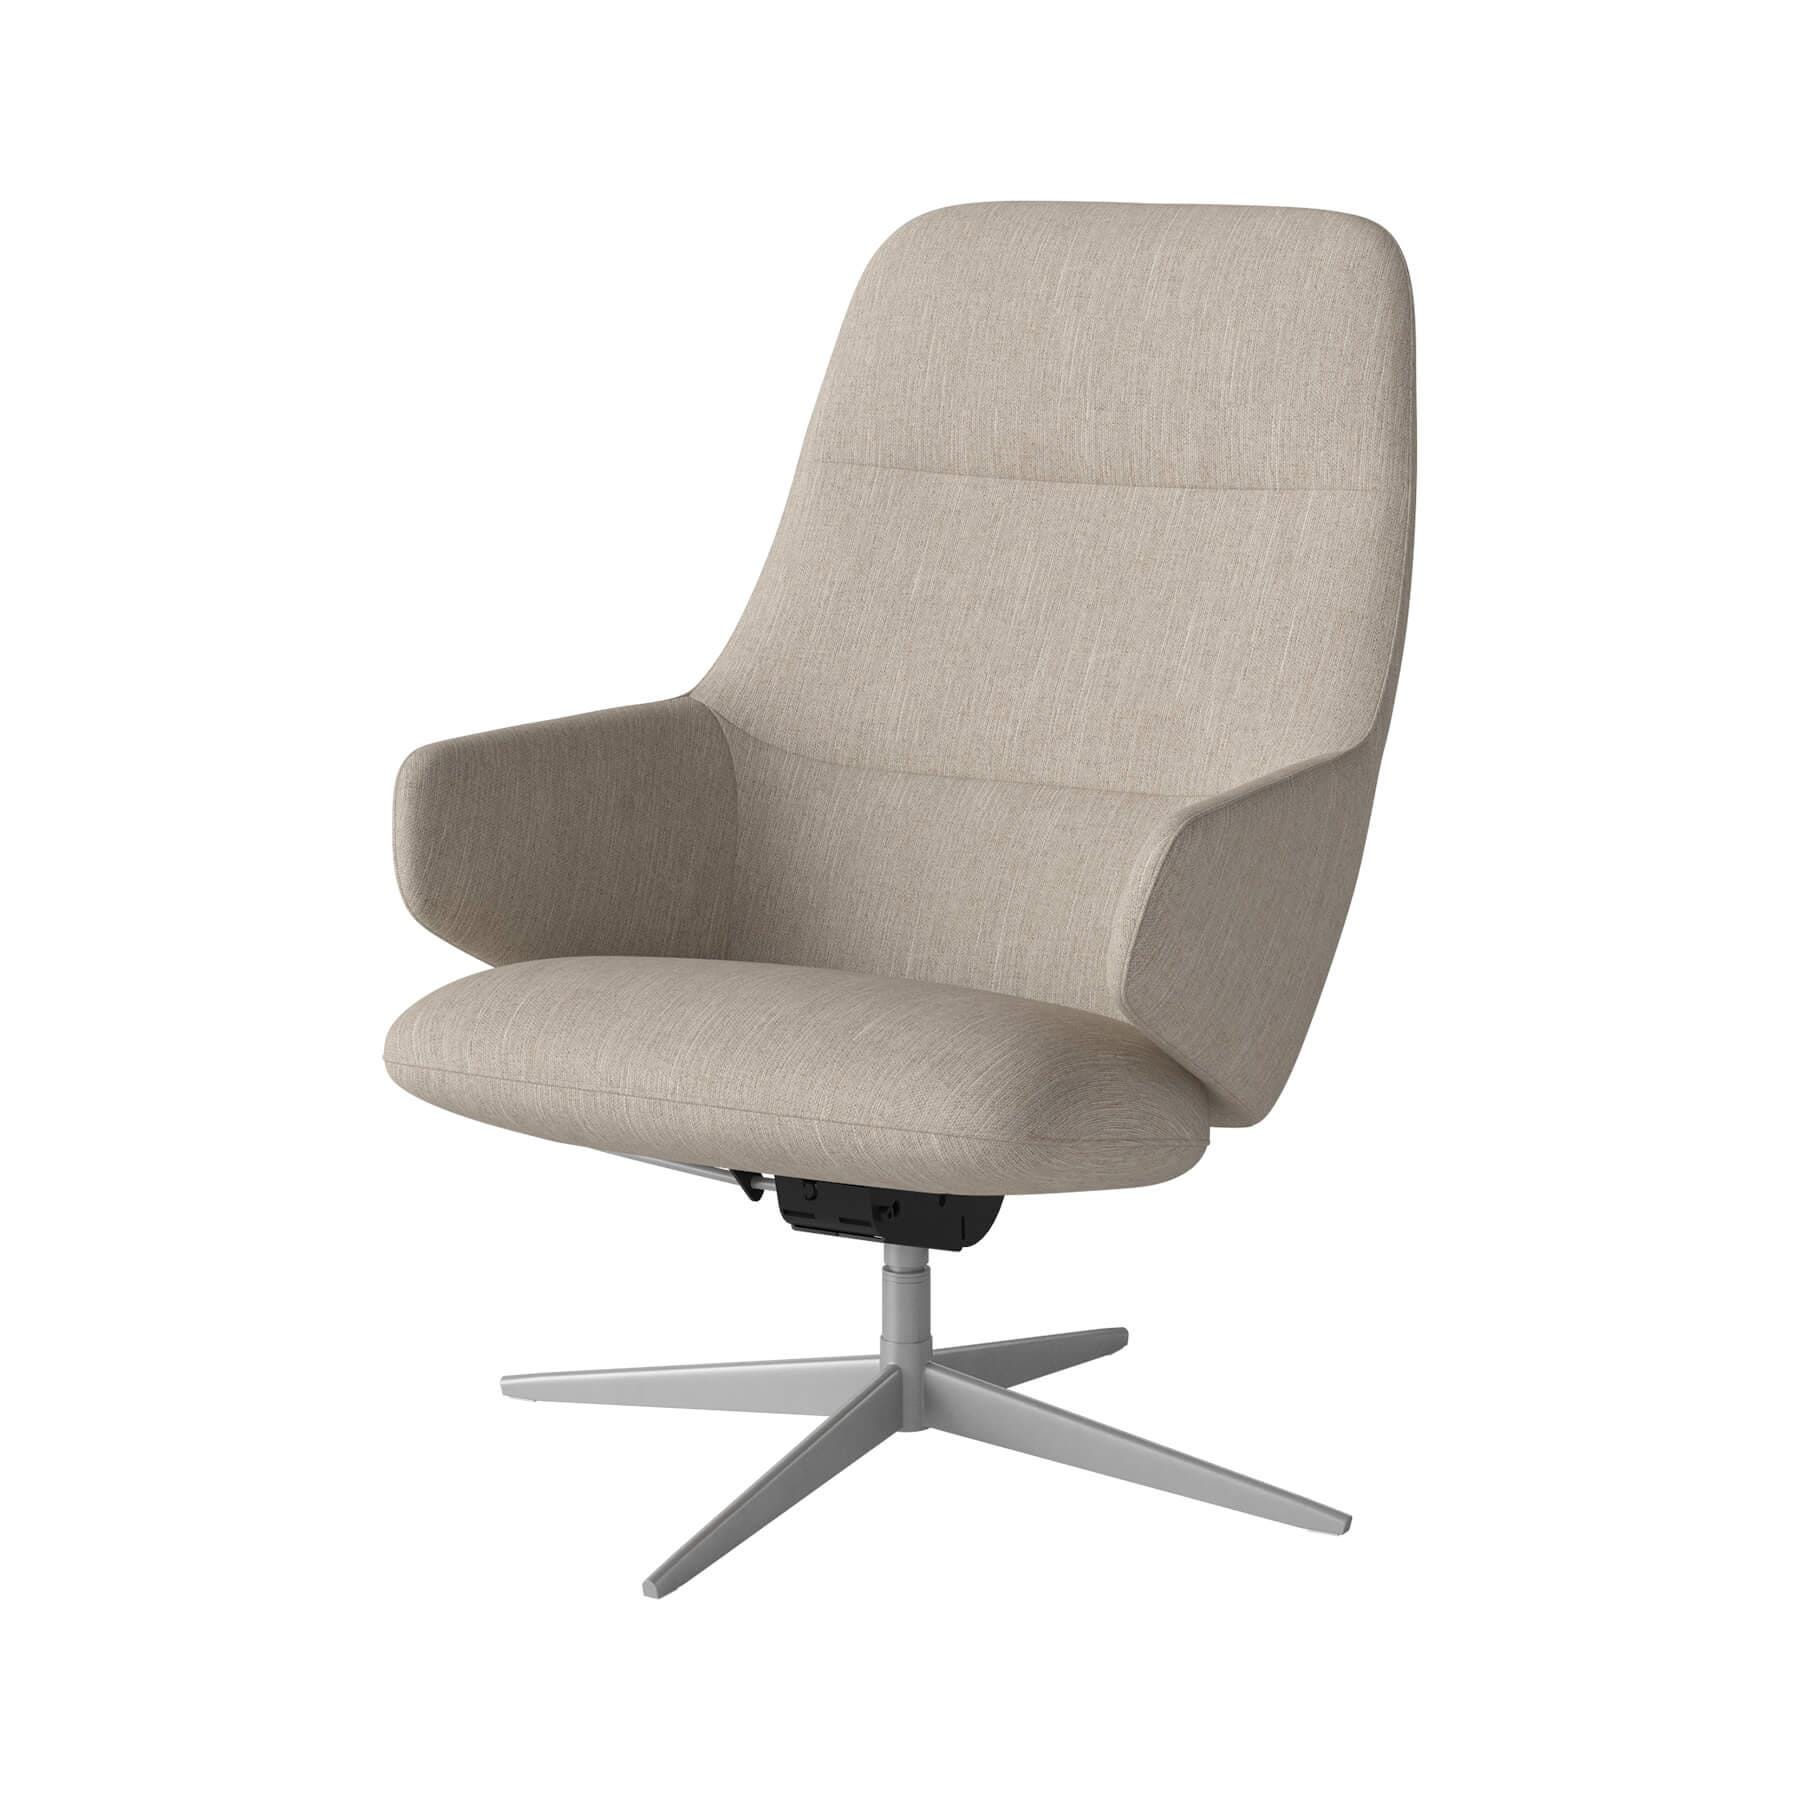 Bolia Clara Armchair Satin Laquered Steel Baize Sand Brown Designer Furniture From Holloways Of Ludlow